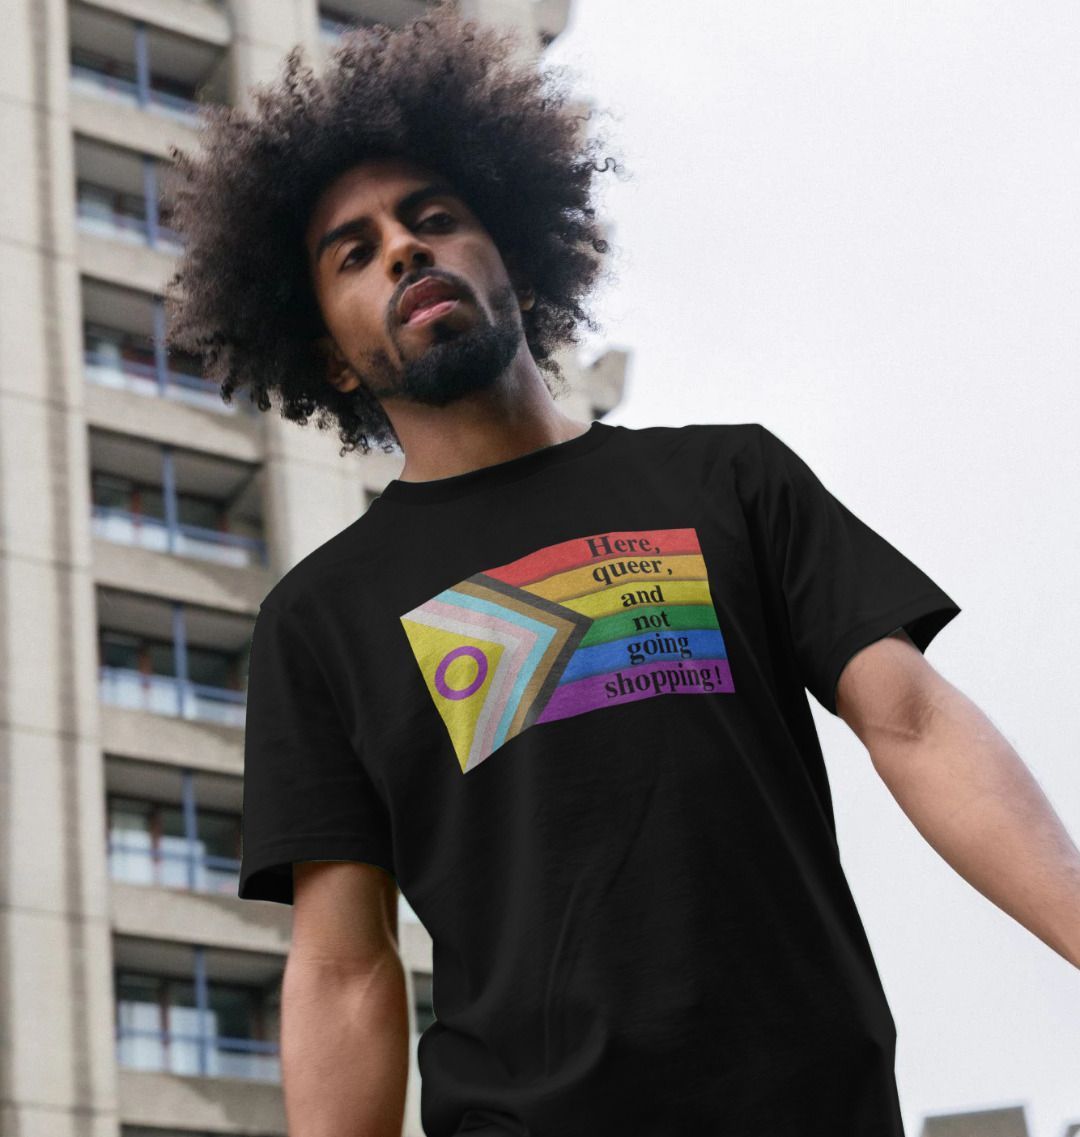 Here, queer and not going shopping unisex T-shirt